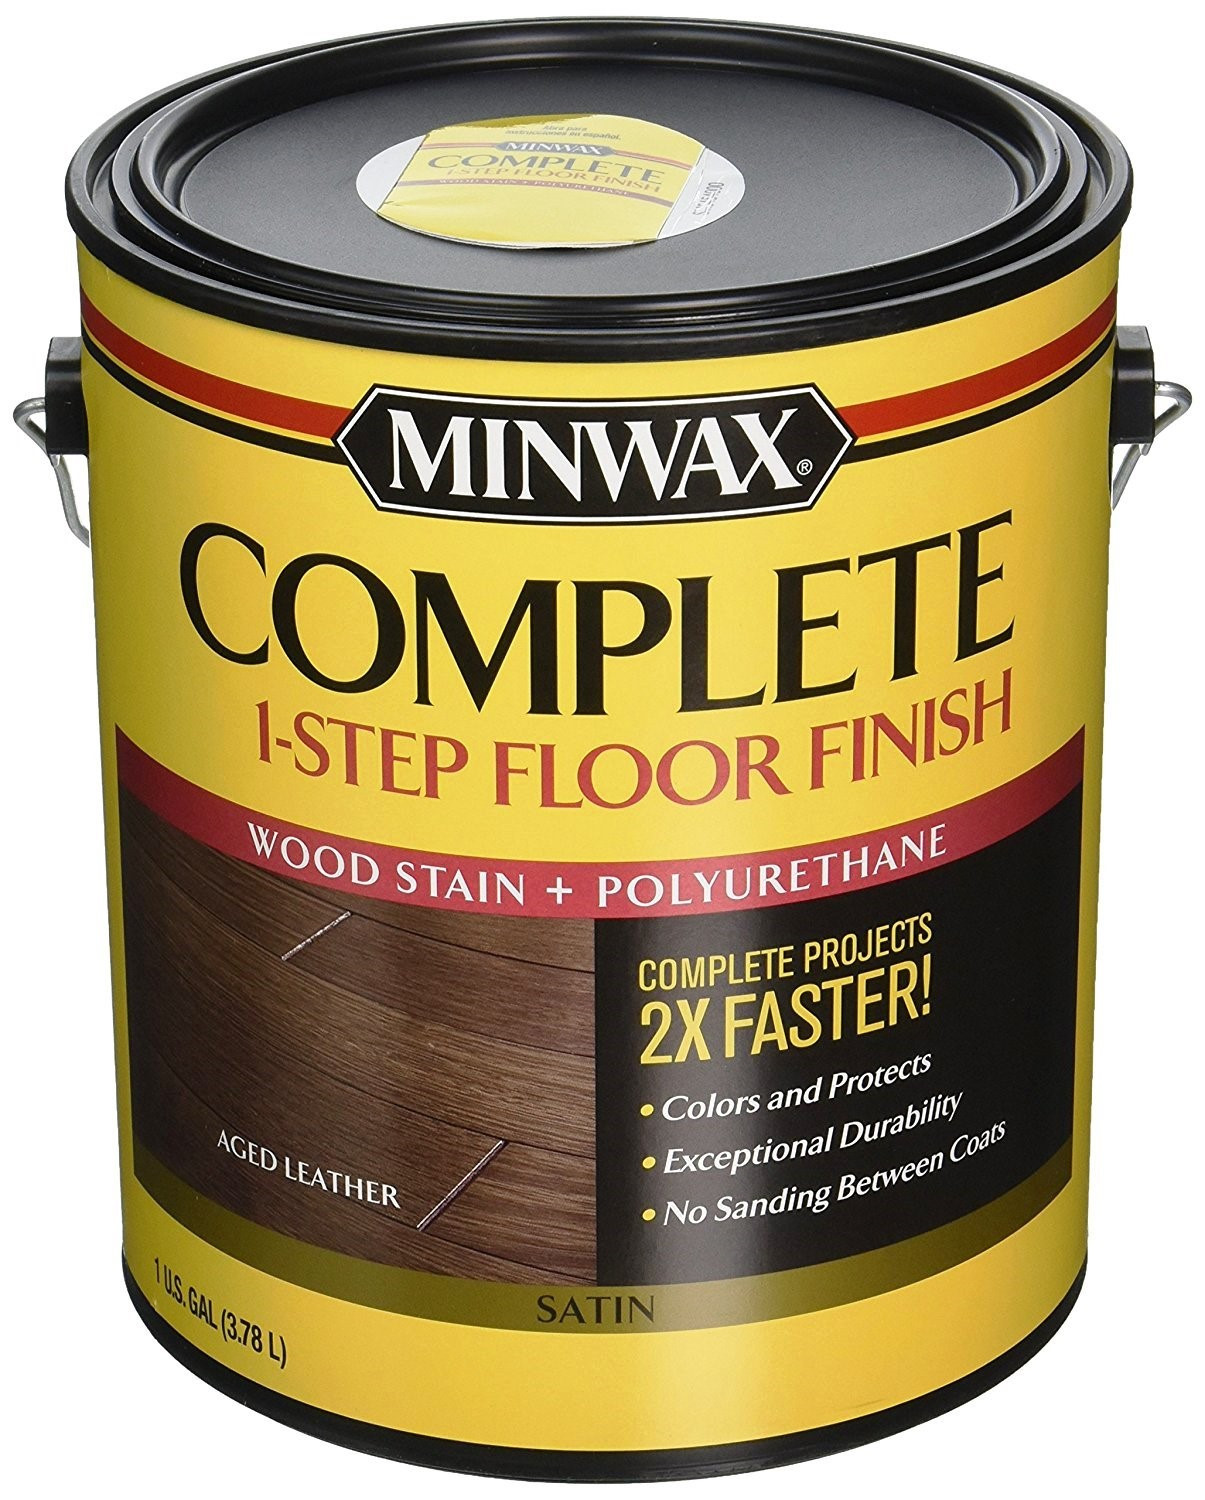 28 Wonderful Hardwood Floor Finishes Satin or Gloss 2024 free download hardwood floor finishes satin or gloss of buy the minwax 672050000 minwax complete one step satin floor finish within satin floor finish aged leather gallon view larger image